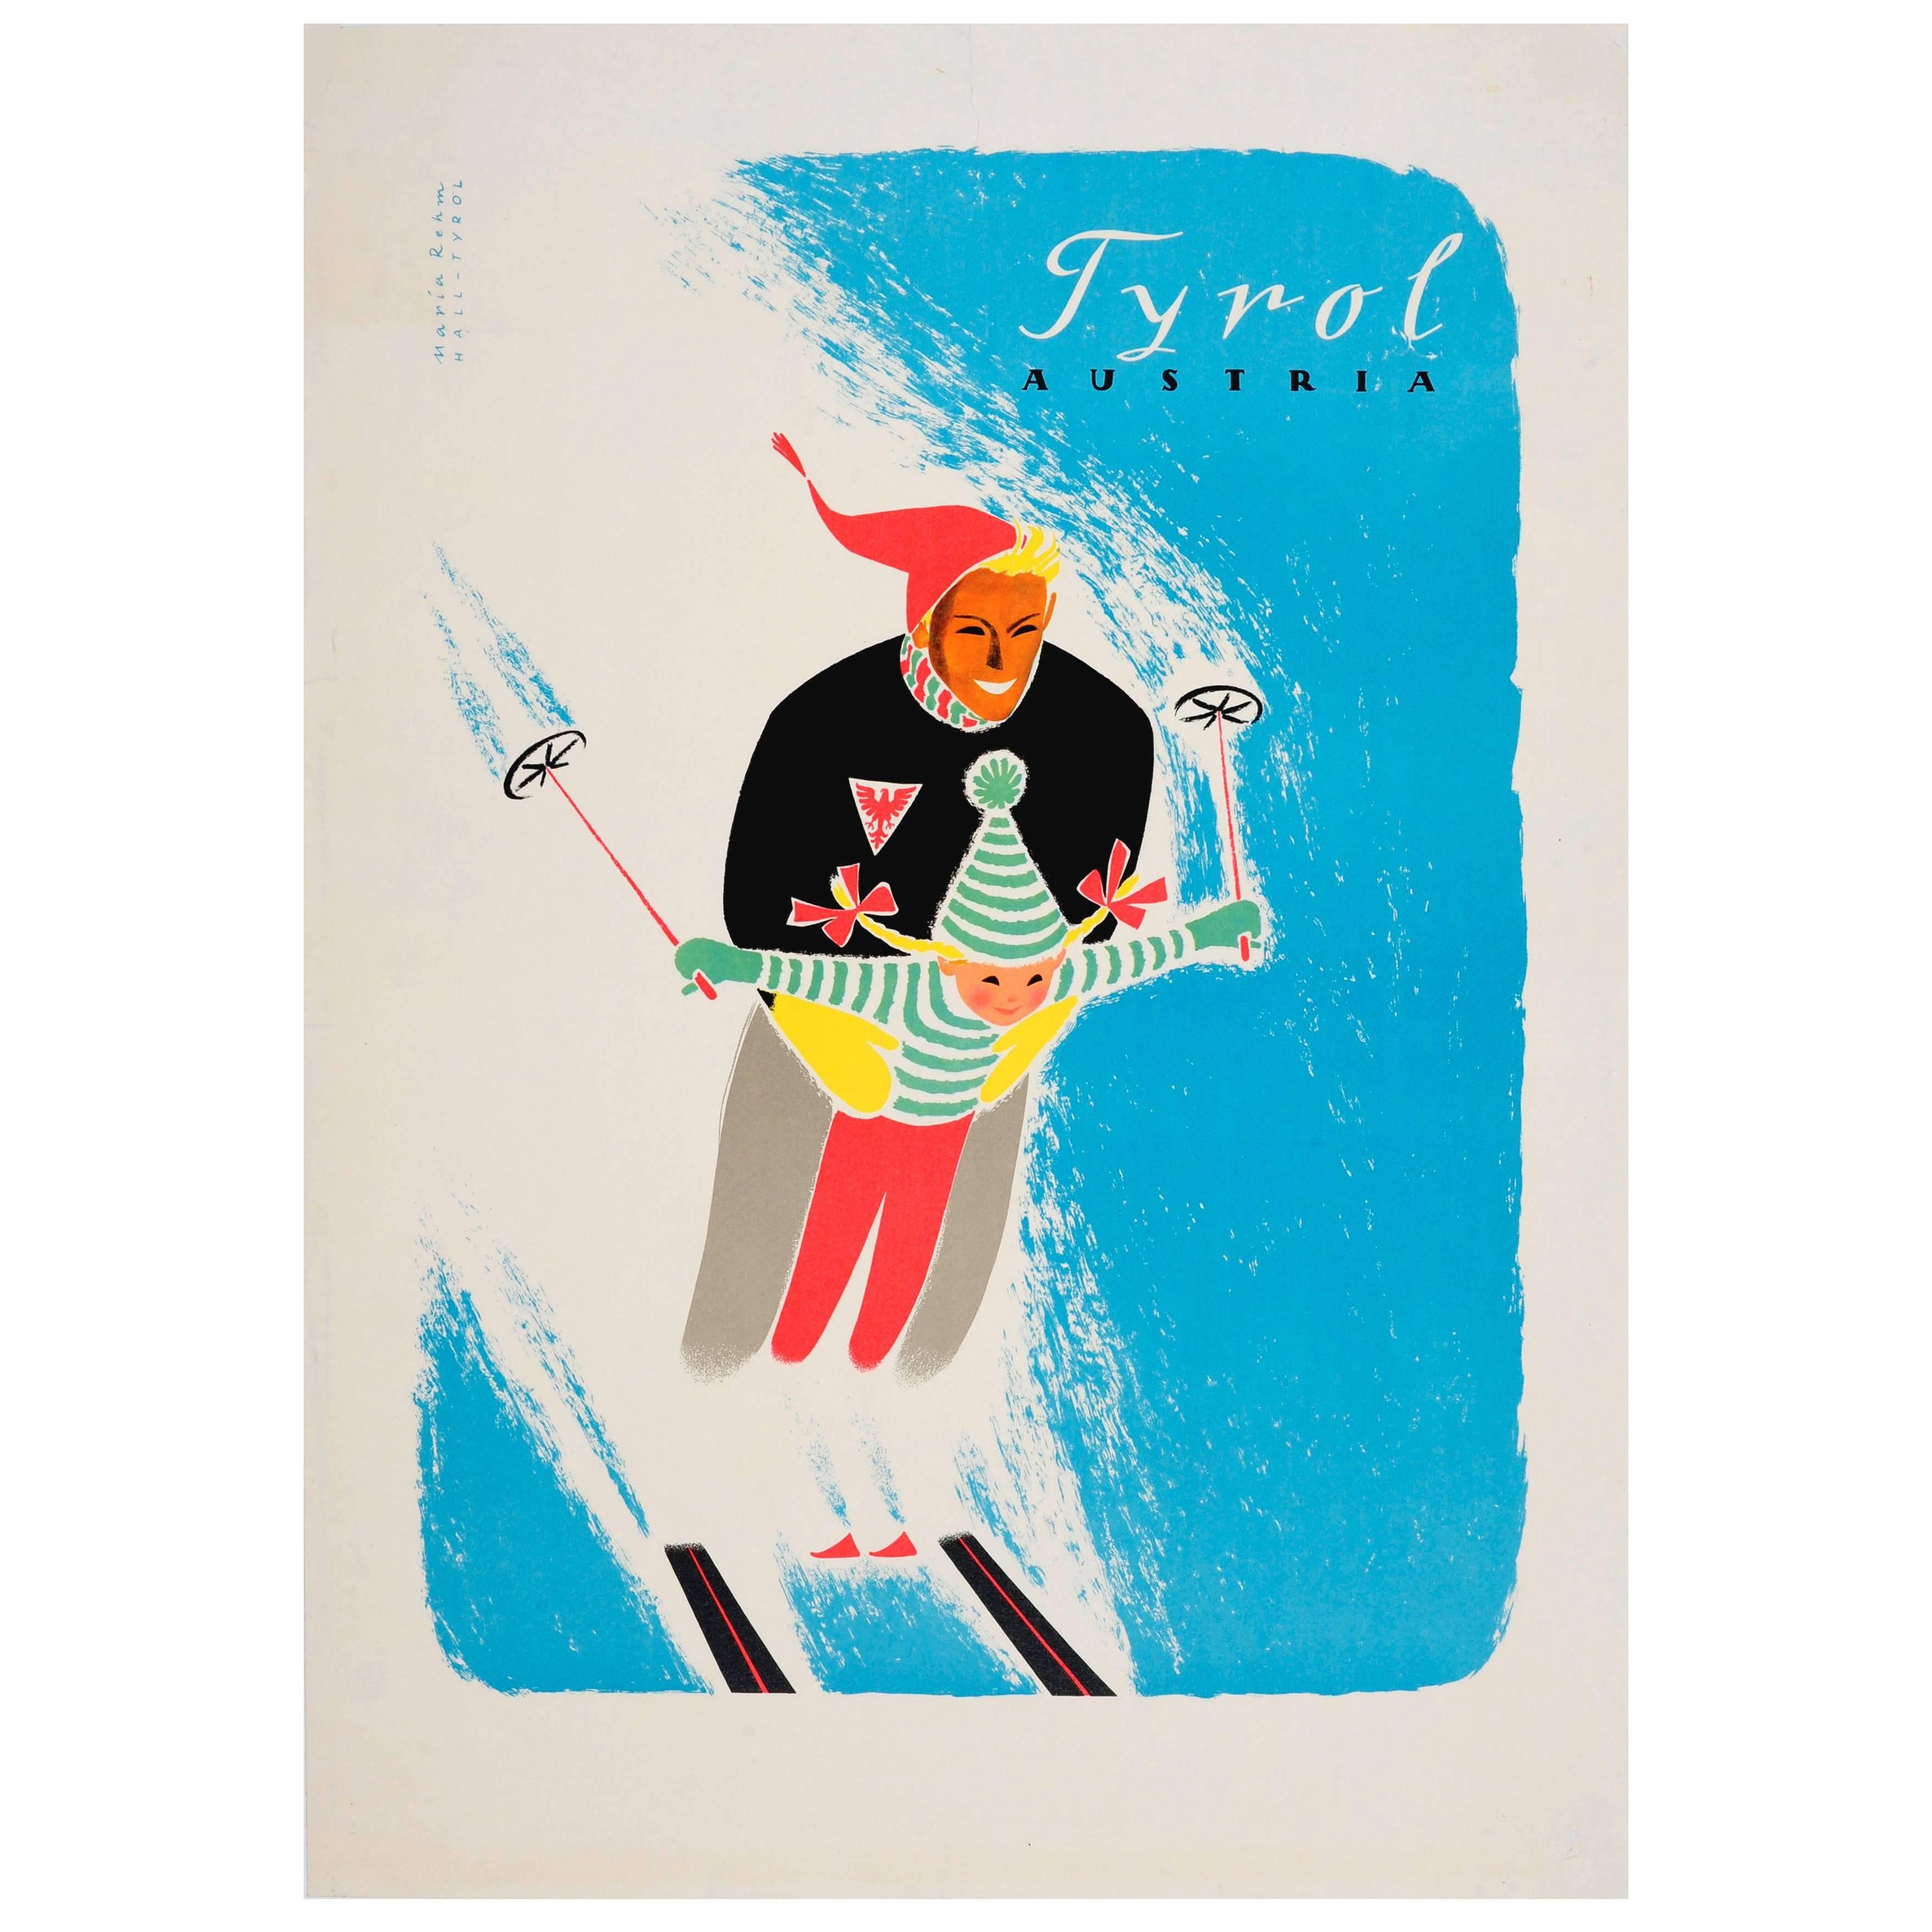 Original Vintage 1950s Skiing Poster, Tyrol Austria, Featuring a Skier and Girl